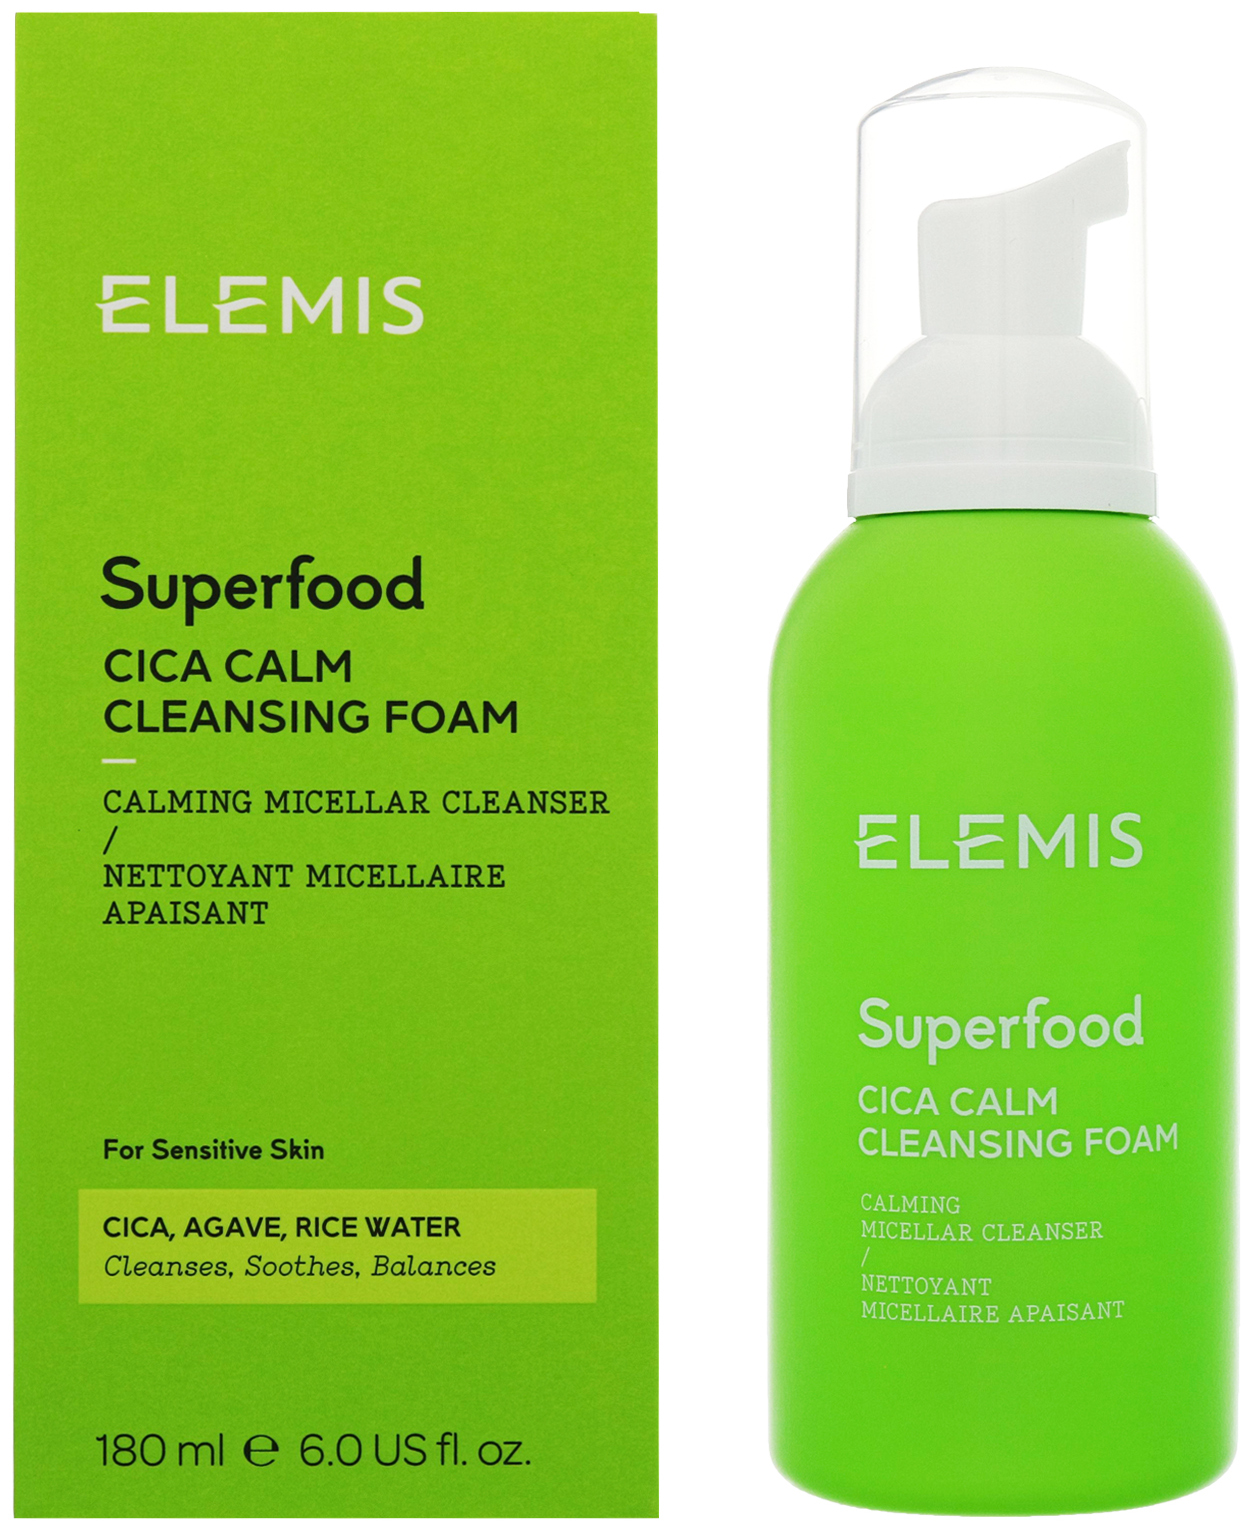 Calming cleansing foam. Elemis Superfood cica Calm Cleansing Foam. Elemis пенка для умывания. Dragon cica PH balanced Cleansing Foam. Elemis Superfood cica Calm Booster.